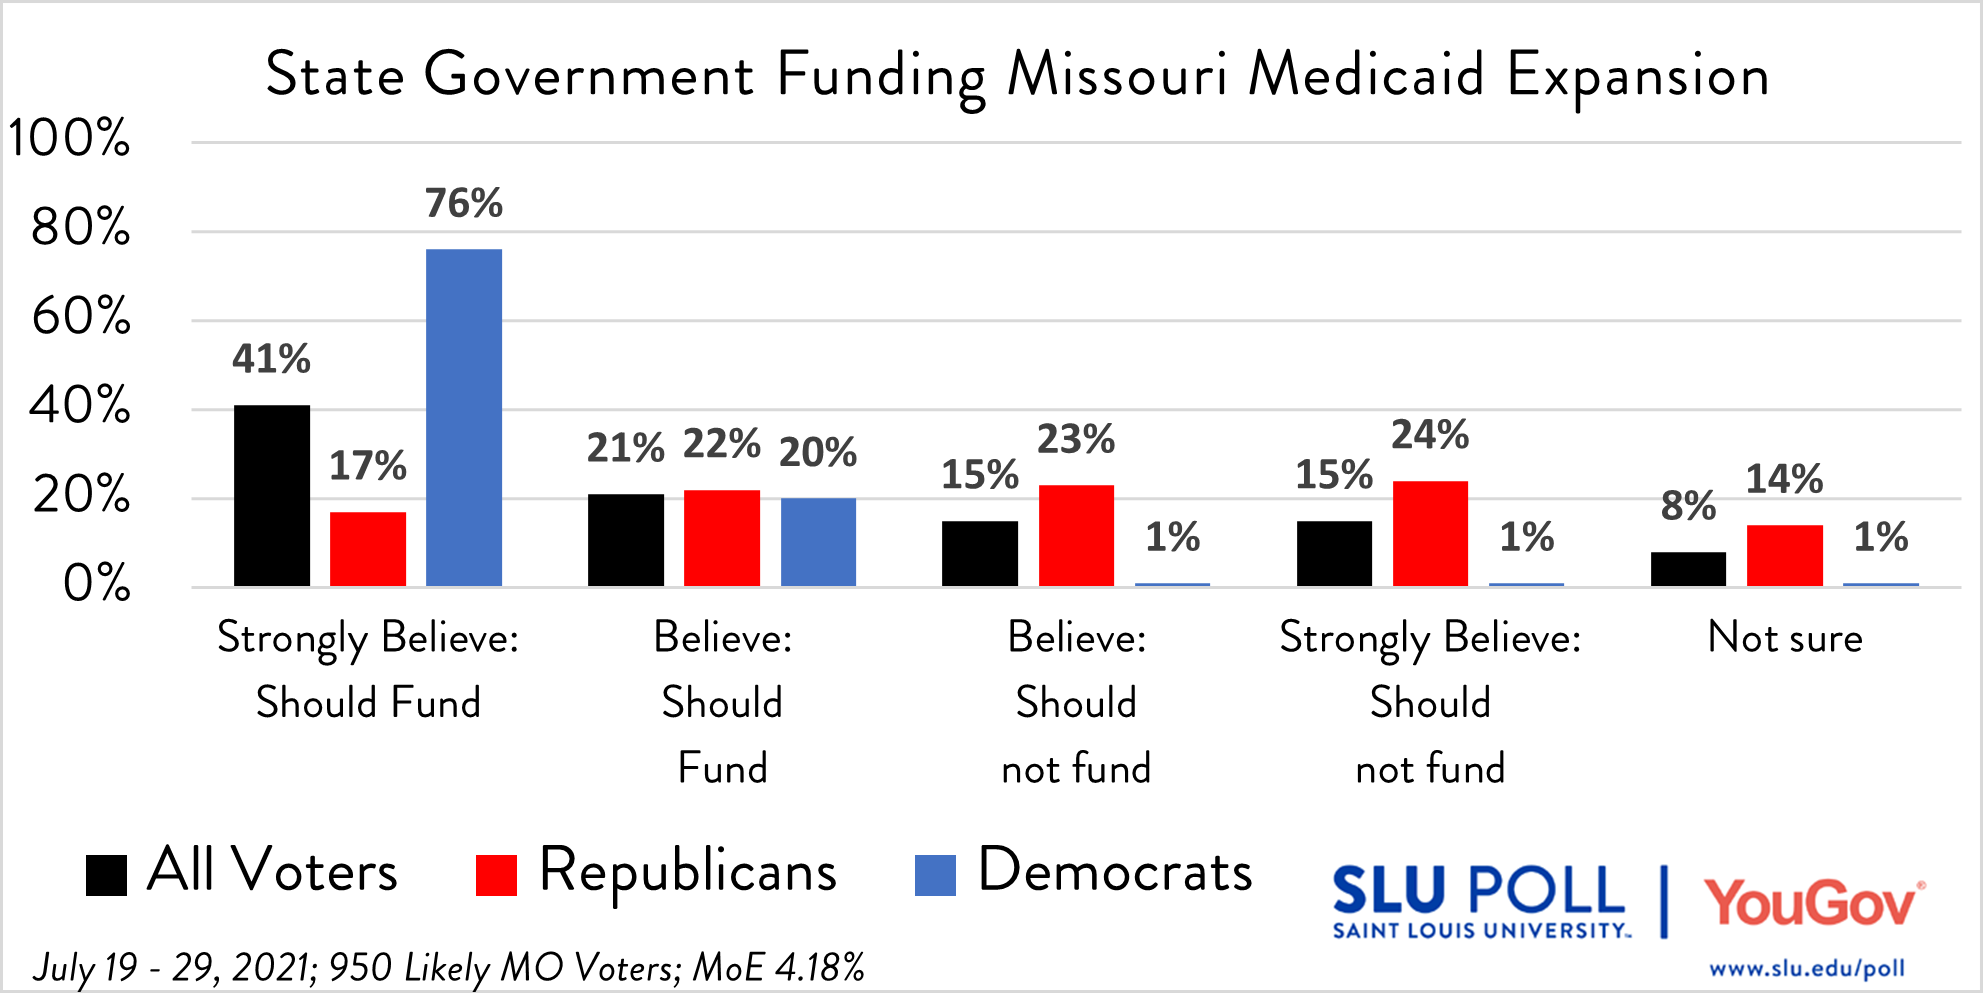 In 2020 Missouri voters voted to approve expanding Medicaid to thousands more low-income Missouri adults, but the State of Missouri has refused to fund the program. How strongly do you feel about Missouri funding Medicaid expansion? - Strongly believe Missouri should fund Medicaid expansion: 41%   - Believe Missouri should fund Medicaid expansion: 21% - Believe Missouri should not fund Medicaid expansion: 15% - Strongly believe Missouri should not fund Medicaid expansion: 15%   - Not sure: 8%